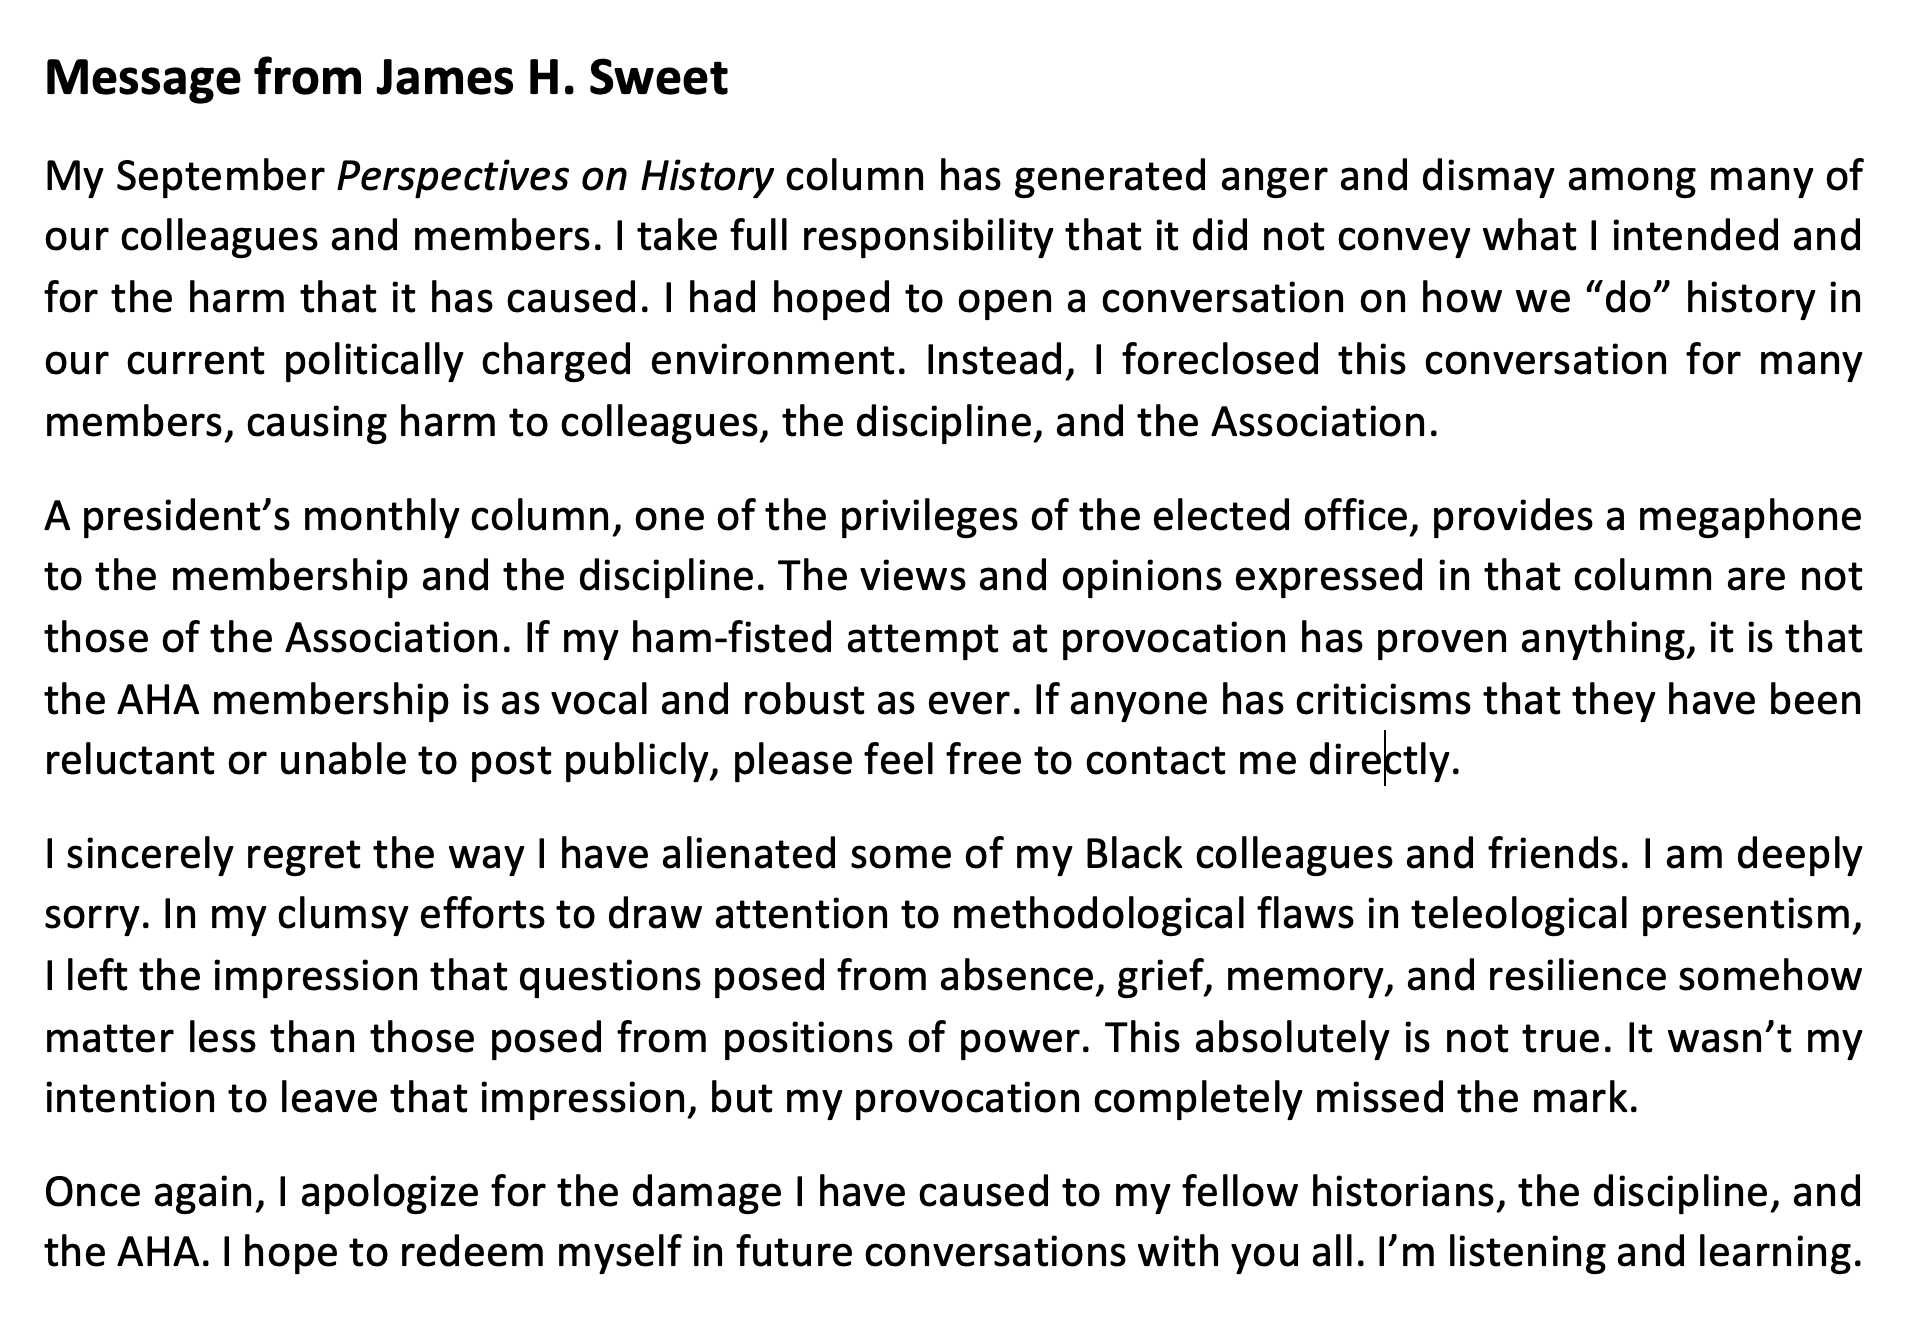 Message from James H. Sweet which reads in part:
My September Perspectives on History column has generated anger and dismay among many of our colleagues and members. I take full responsibility that it did not convey what I intended and for the harm that it has caused. I had hoped to open a conversation on how we “do” history in our current politically charged environment. Instead, I foreclosed this conversation for many members, causing harm to colleagues, the discipline, and the Association. ... I sincerely regret the way I have alienated some of my Black colleagues and friends. I am deeply sorry. ... I hope to redeem myself in future conversations with you all. I’m listening and learning.